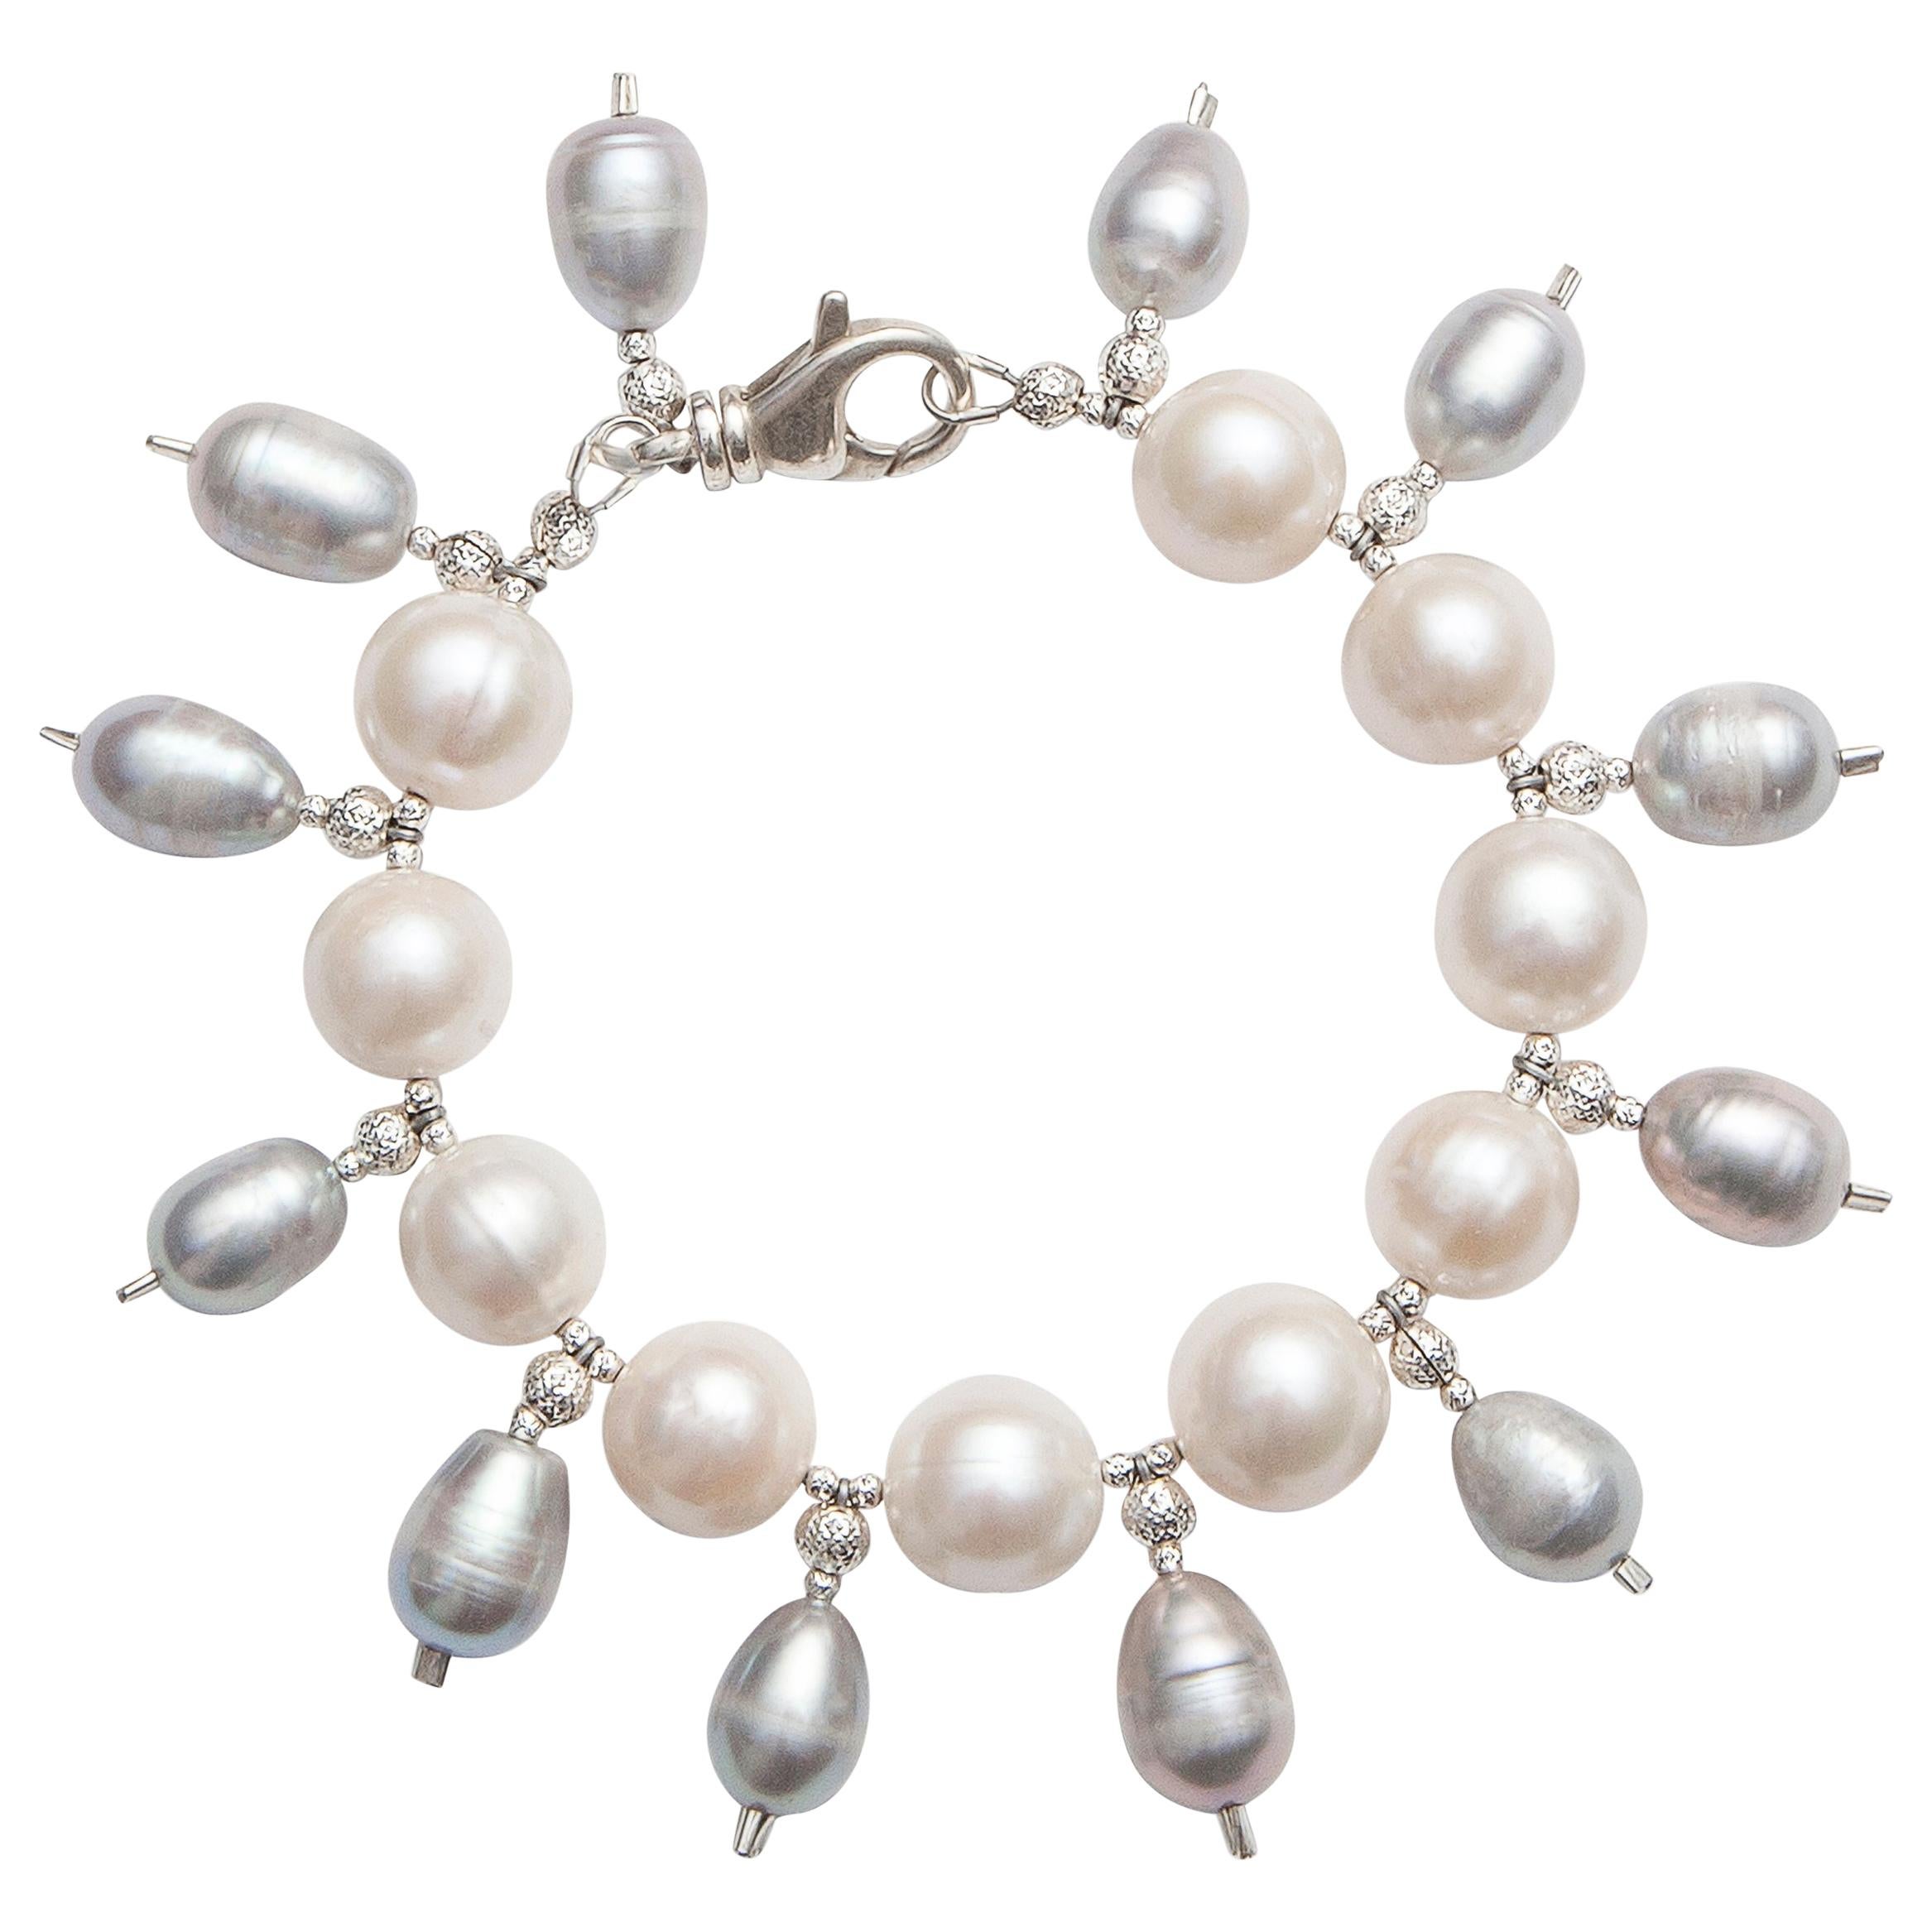 Pearl Bracelet with White Round Pearls and Grey Dangled Baroque Pearls For Sale